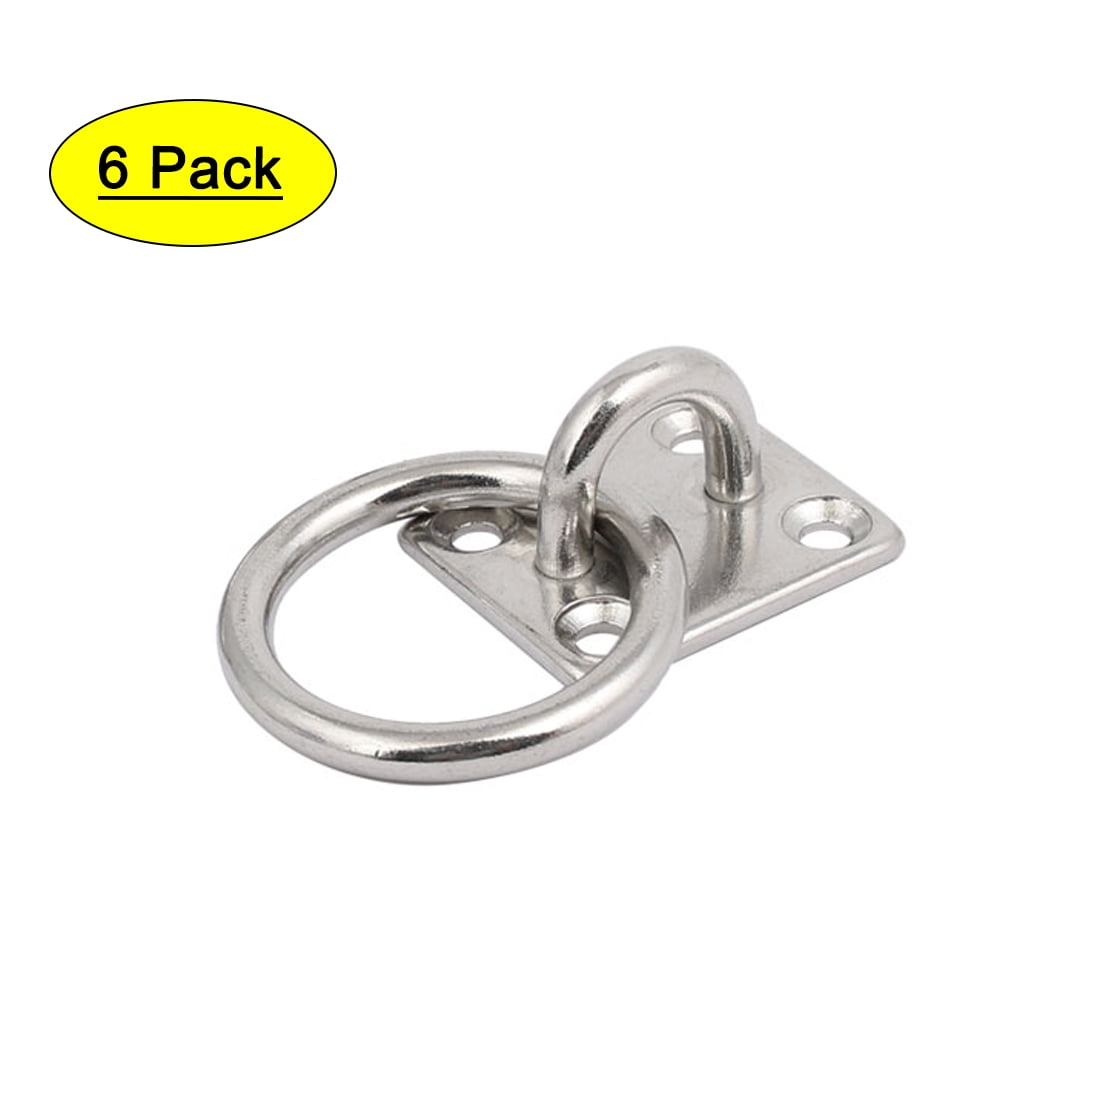 6mm BULK BUY X10 Snap Hook 316  Stainless Steel Shade Sail Boat Accessories 